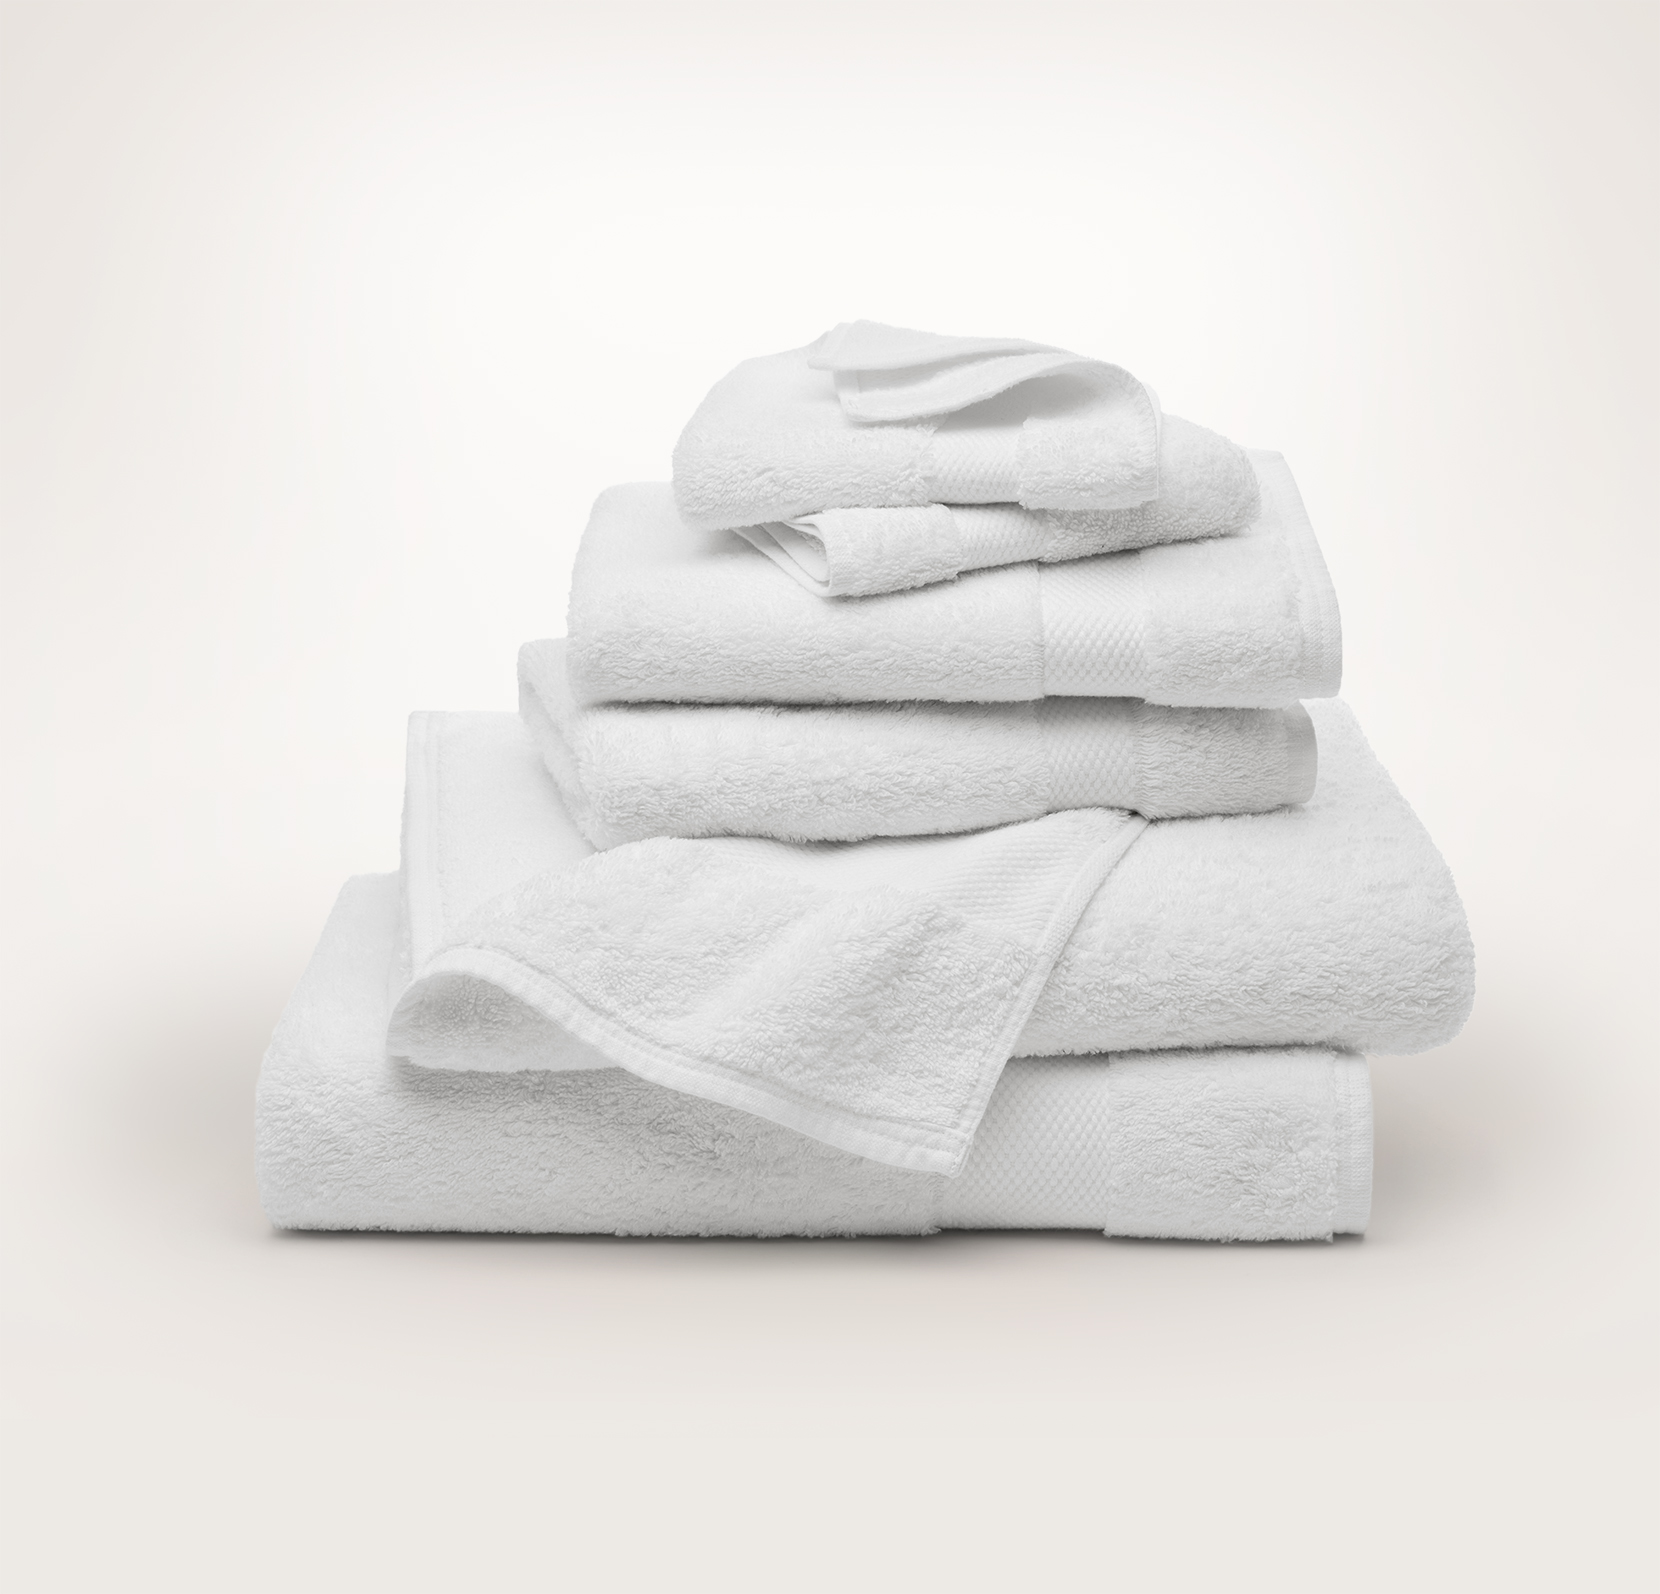 Pile of folded towels from Boll & Branch